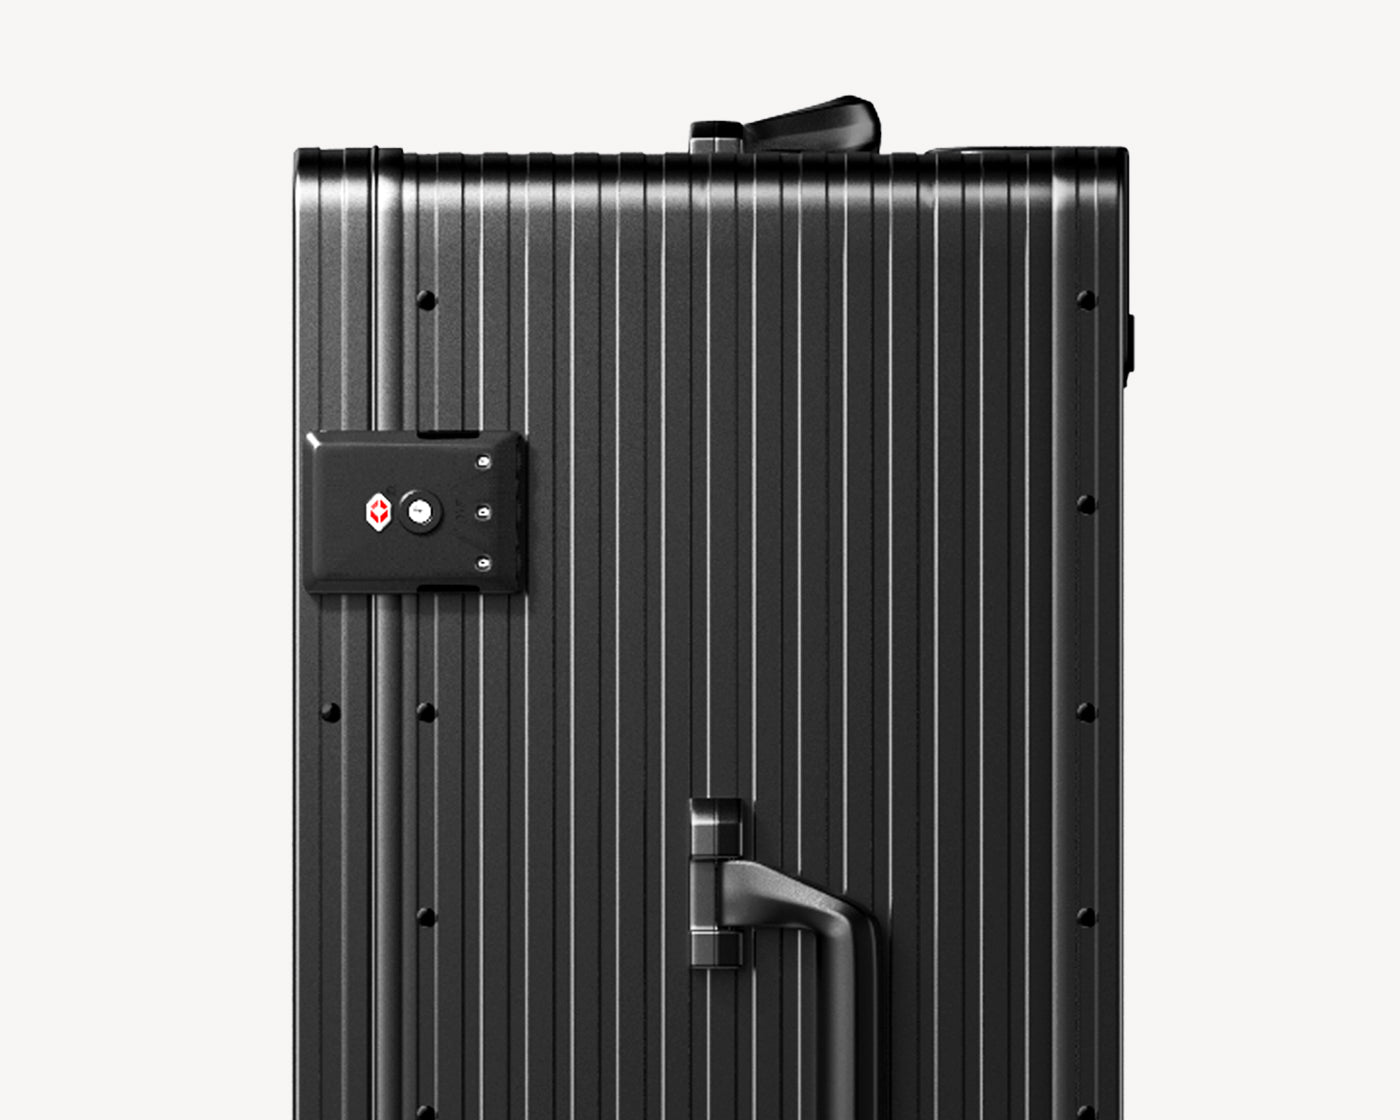 Close-up image of a black ribbed luggage in an upright position, featuring a TSA-approved combination lock and a side handle, set against a light background.